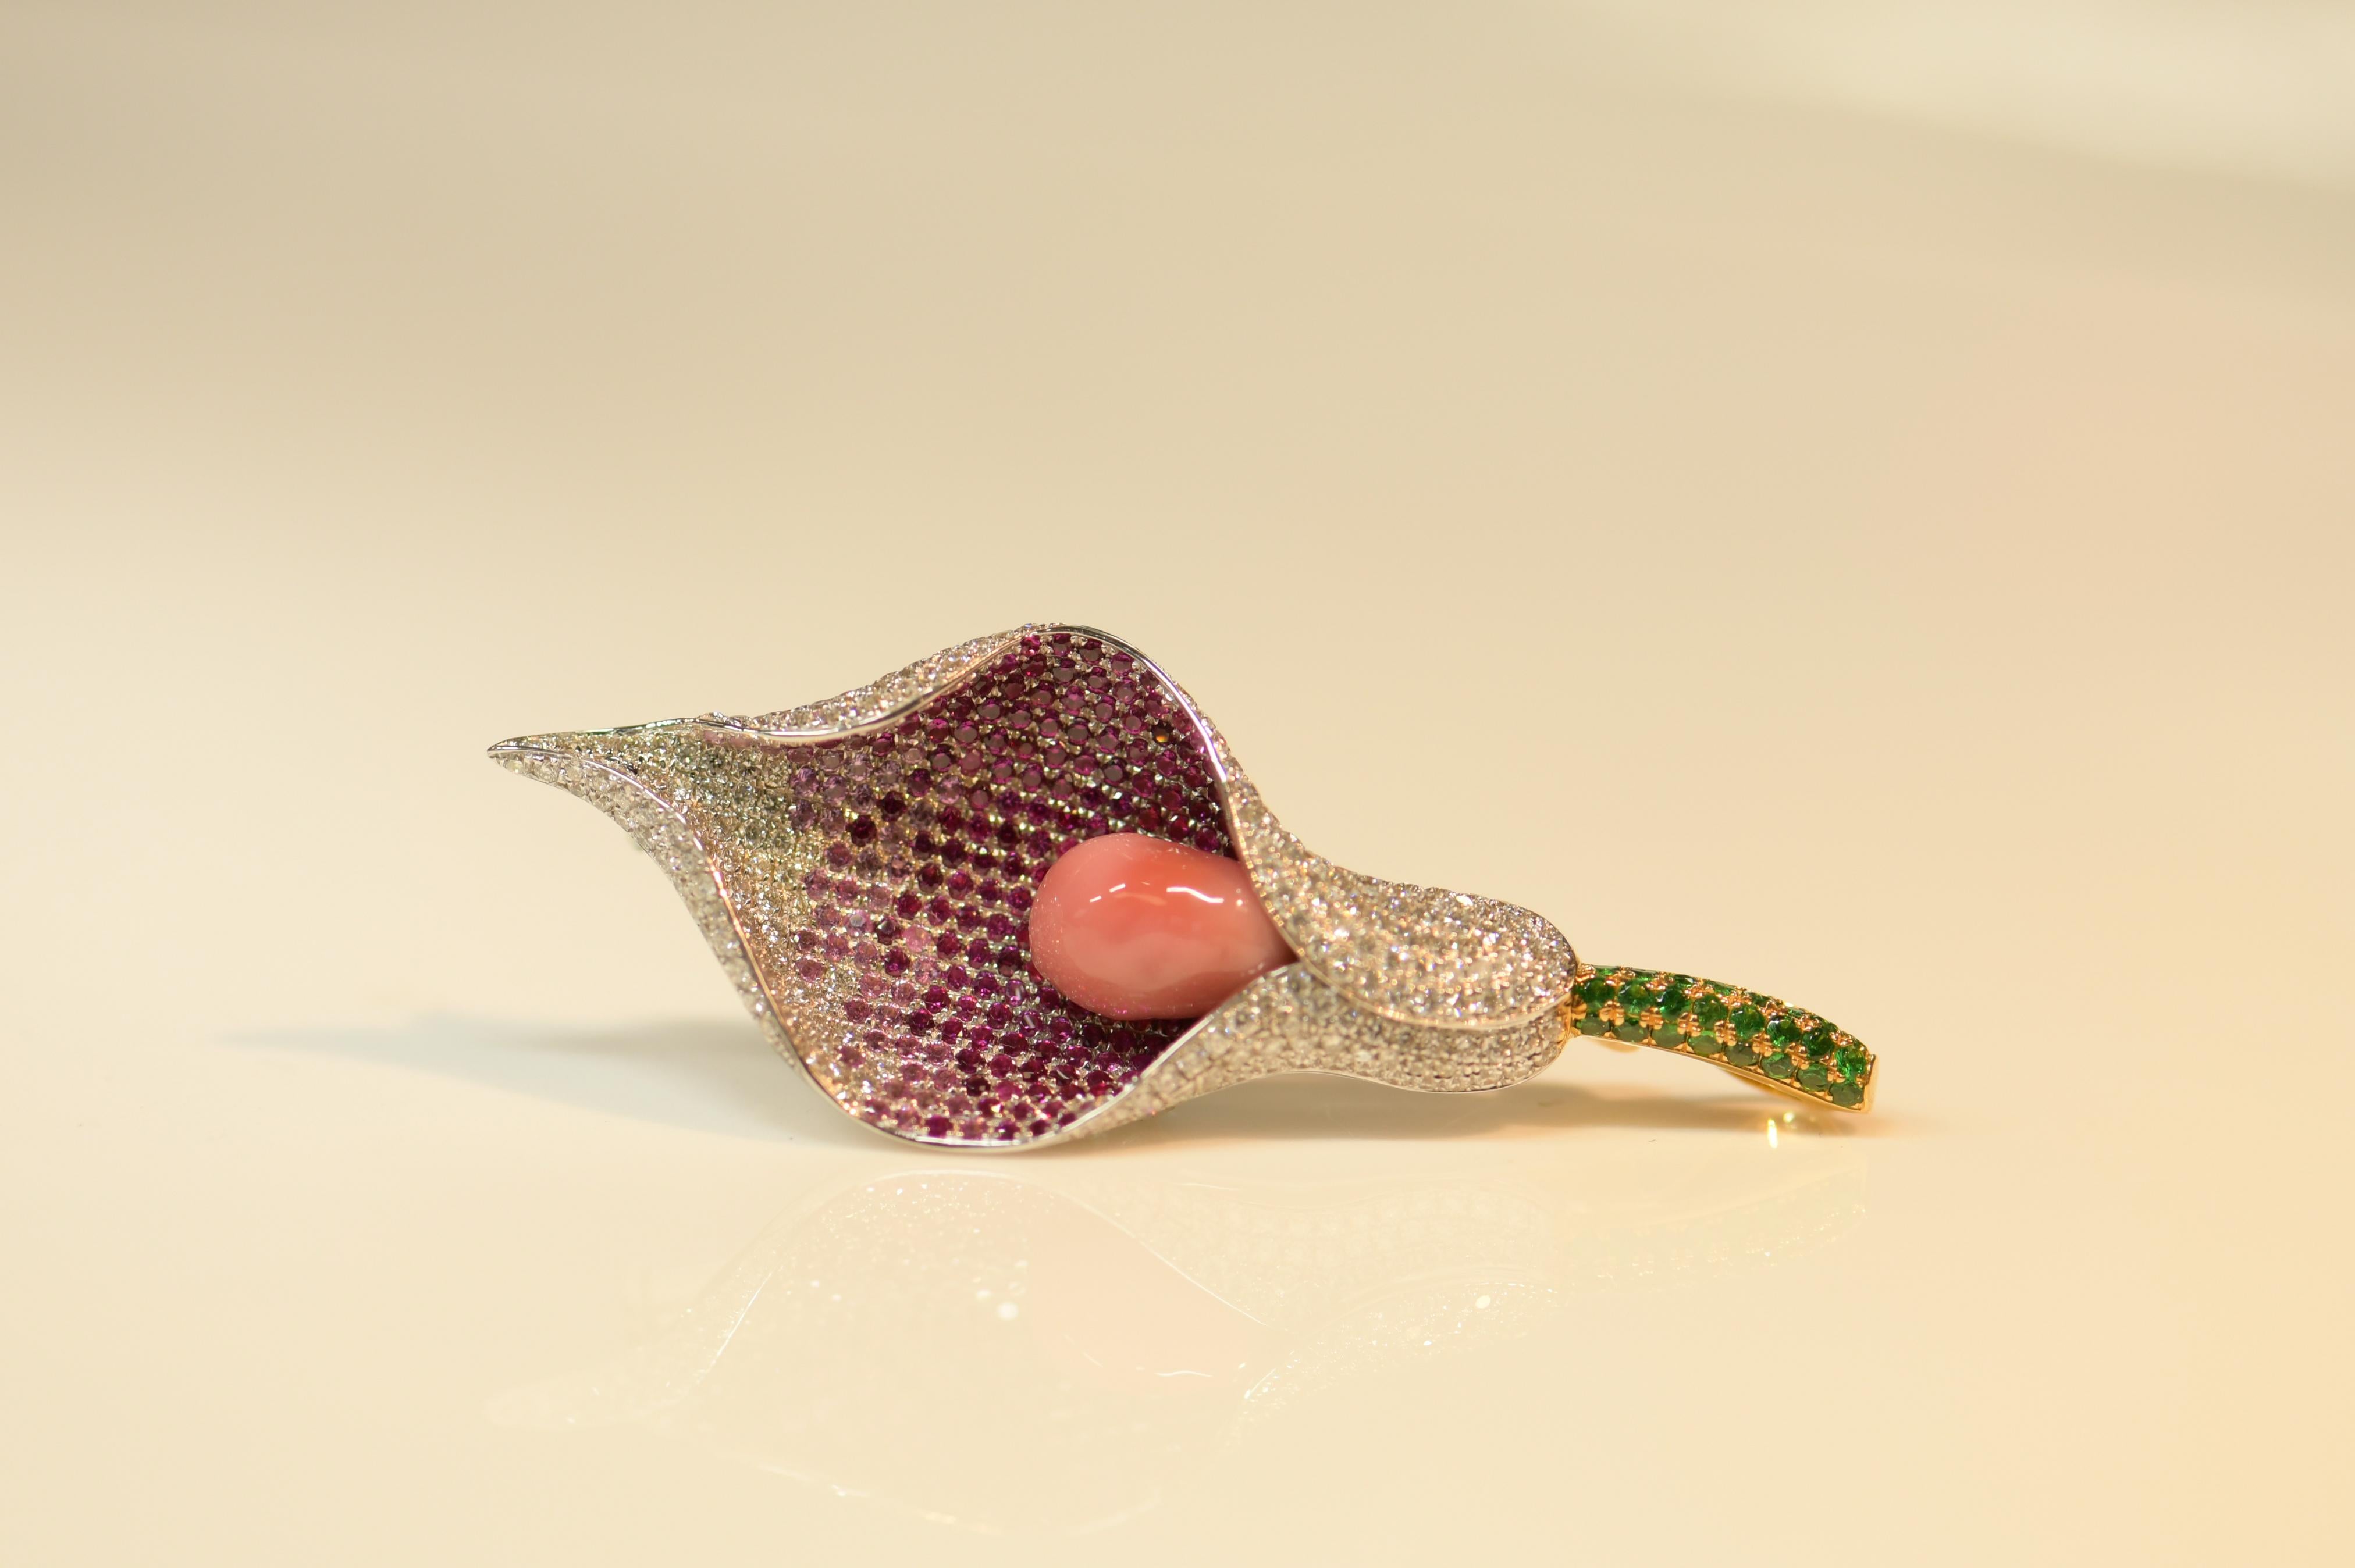 This brooch is in the shape of a calla lily. This elegant flower is often used to represent purity and faithfulness. This unique brooch is the perfect gift for a loved one. 

The craftsmanship is clear in the setting of the stones and the flowing